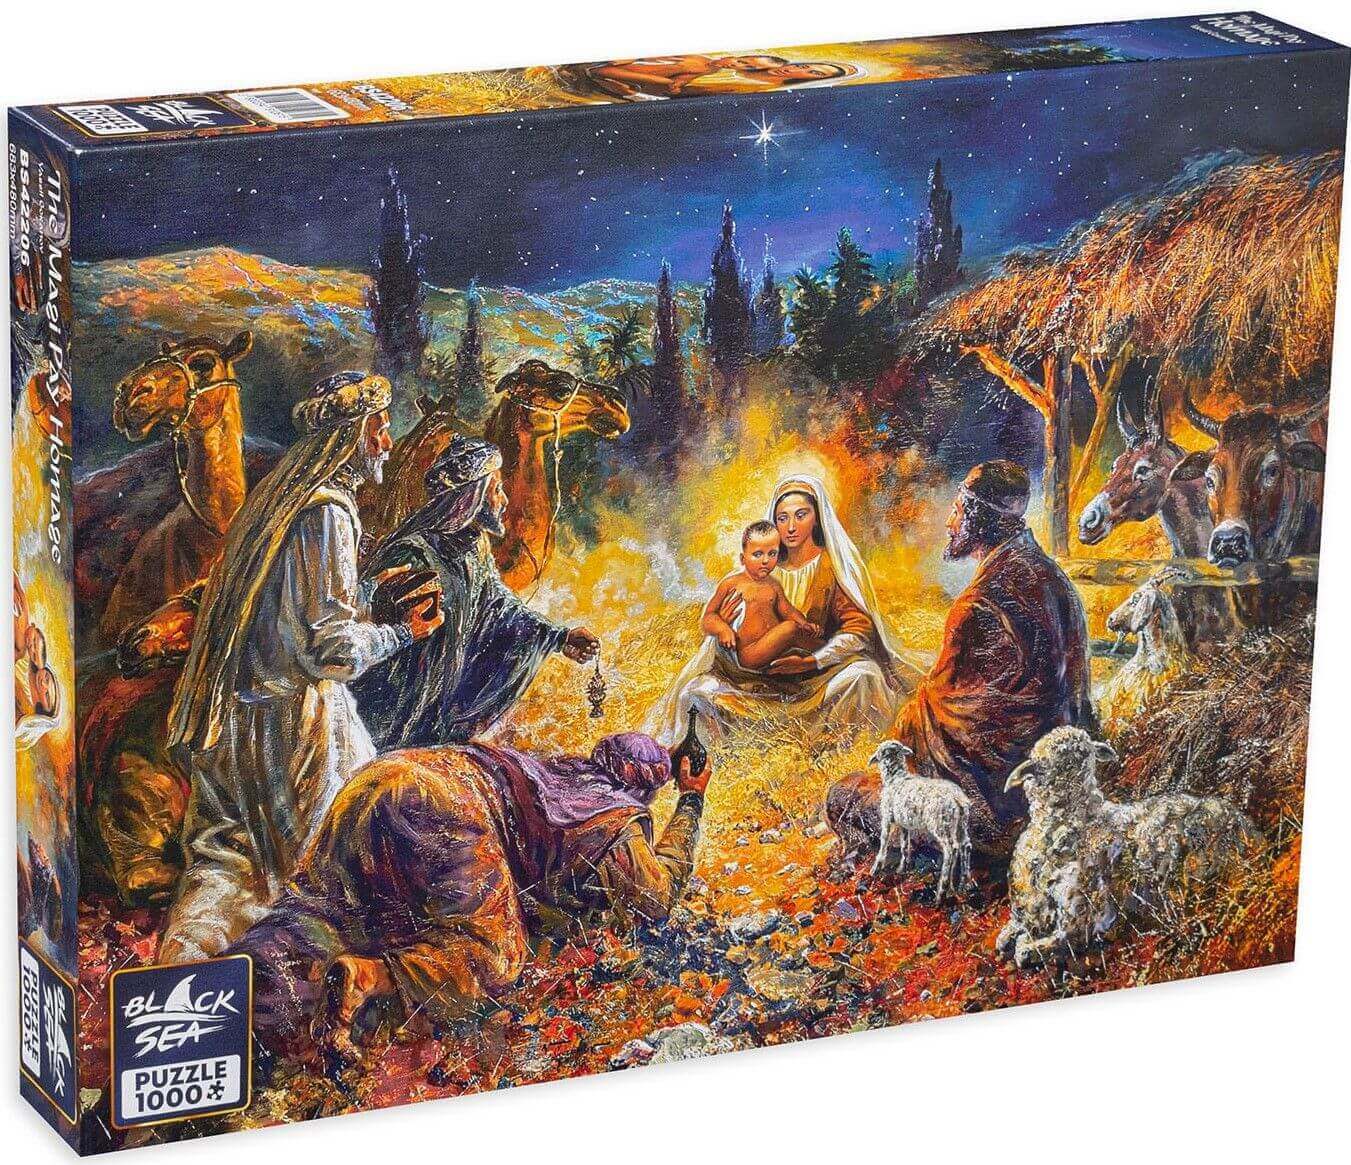 Puzzle Black Sea Premium 1000 pieces - The Magi Pay Homage, The Bulgarian artist Vasil Goranov presents an extraordinary interpretation based on the classical scene from the Bible, depicting the homage paid by the Magi to the new-born Saviour. The picture